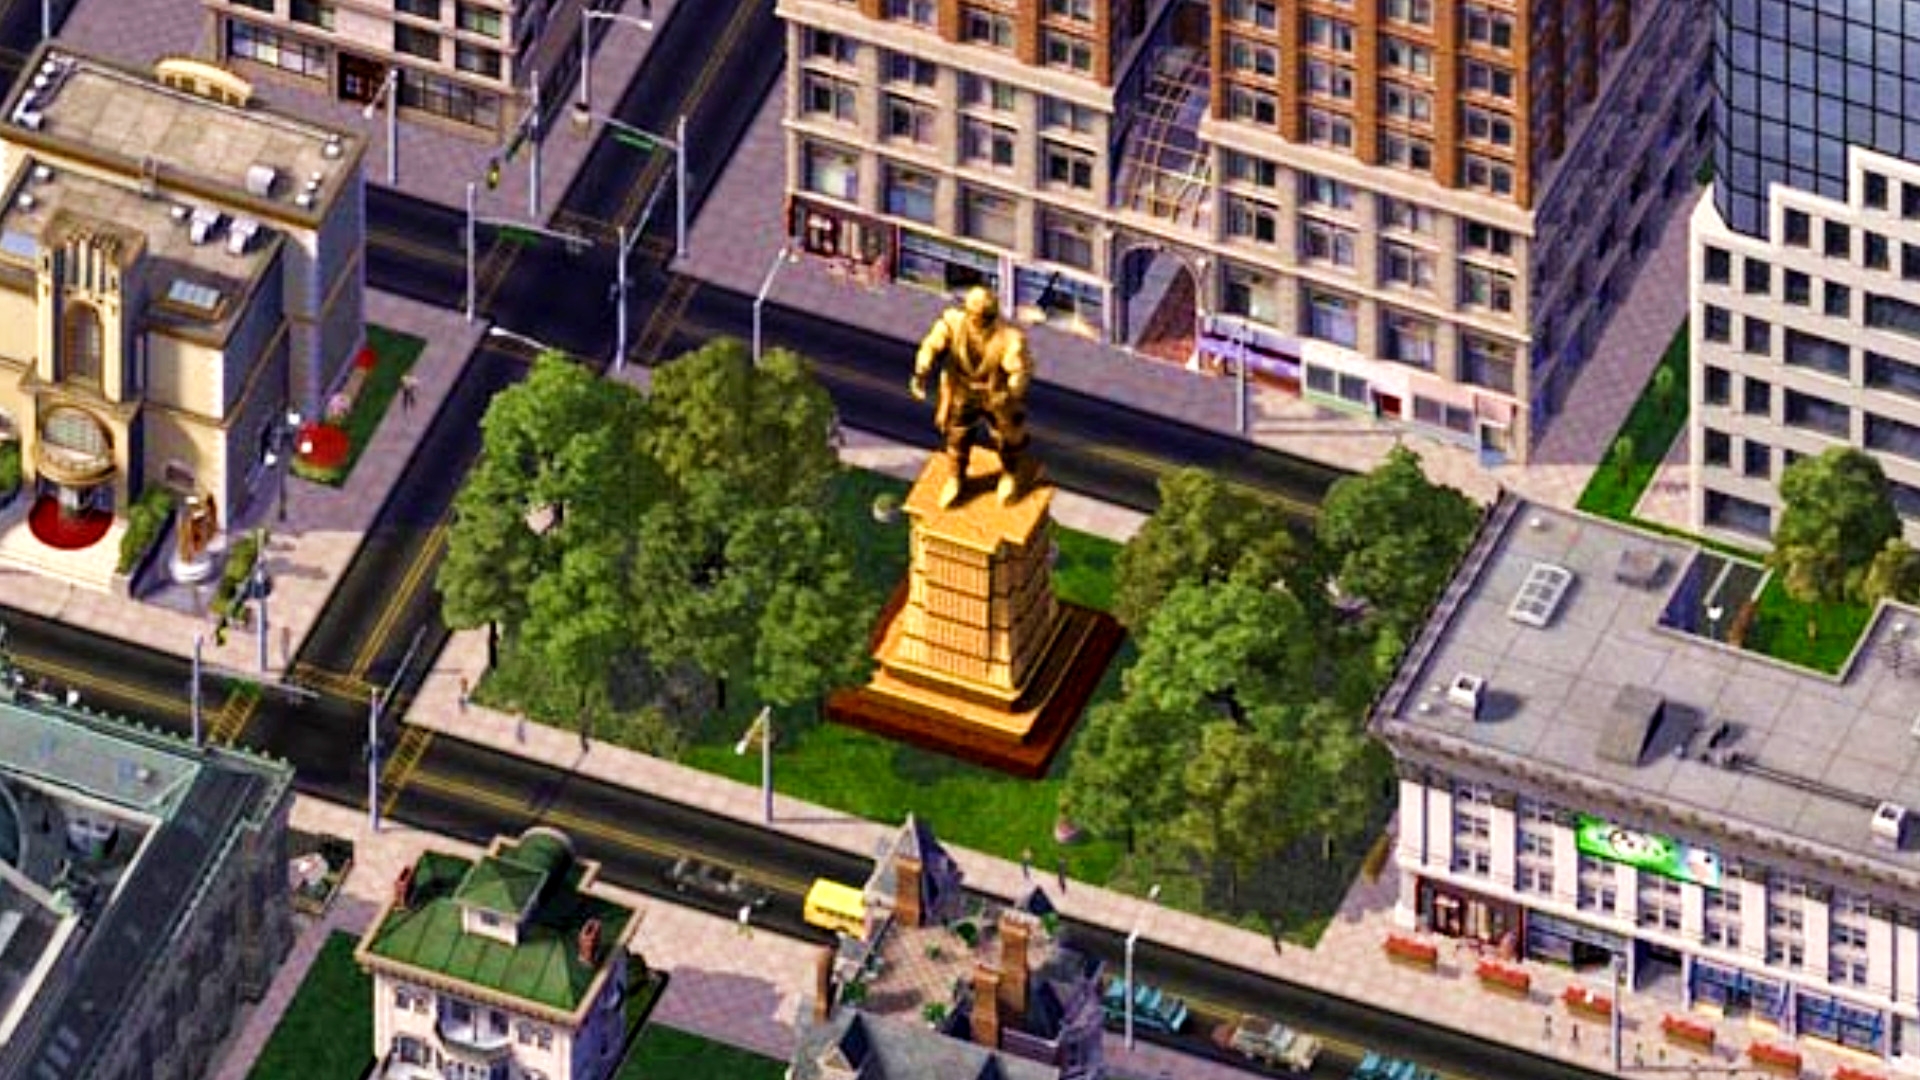 The greatest city builder of them all is yours for just $5 right now